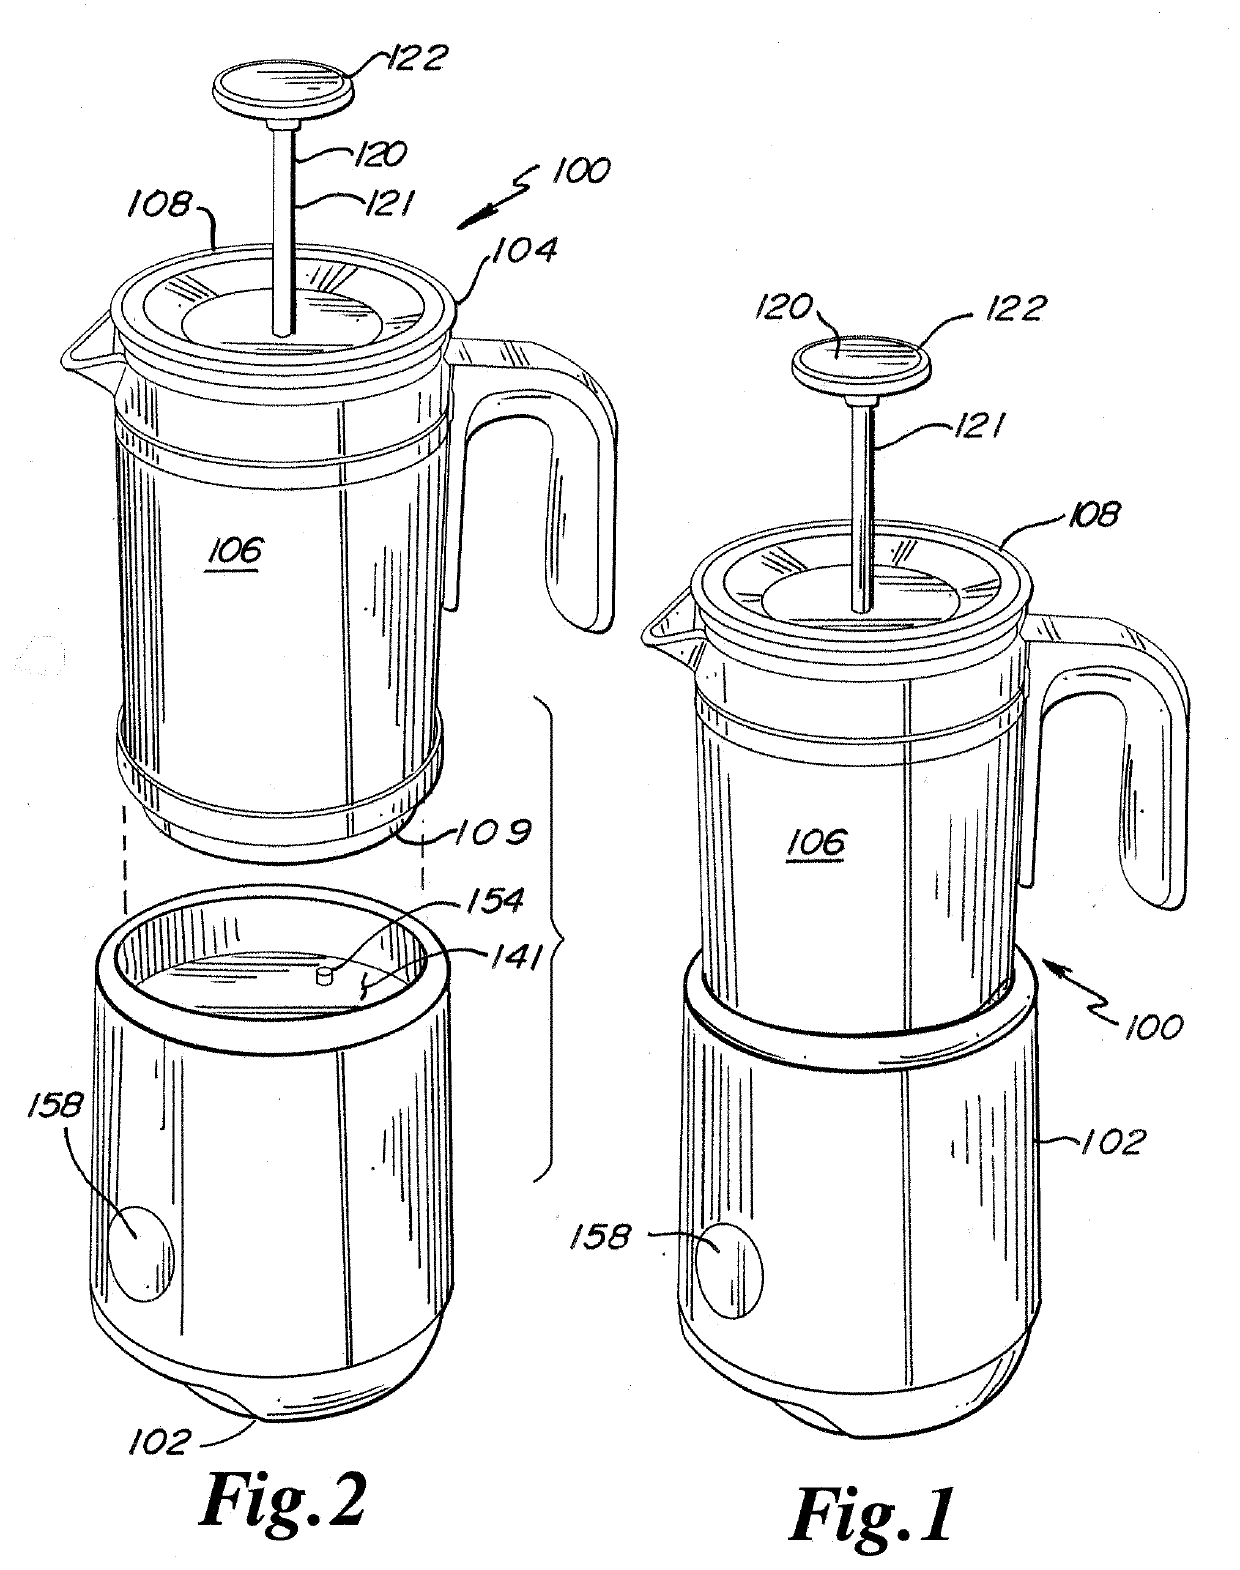 Coffee maker and frother